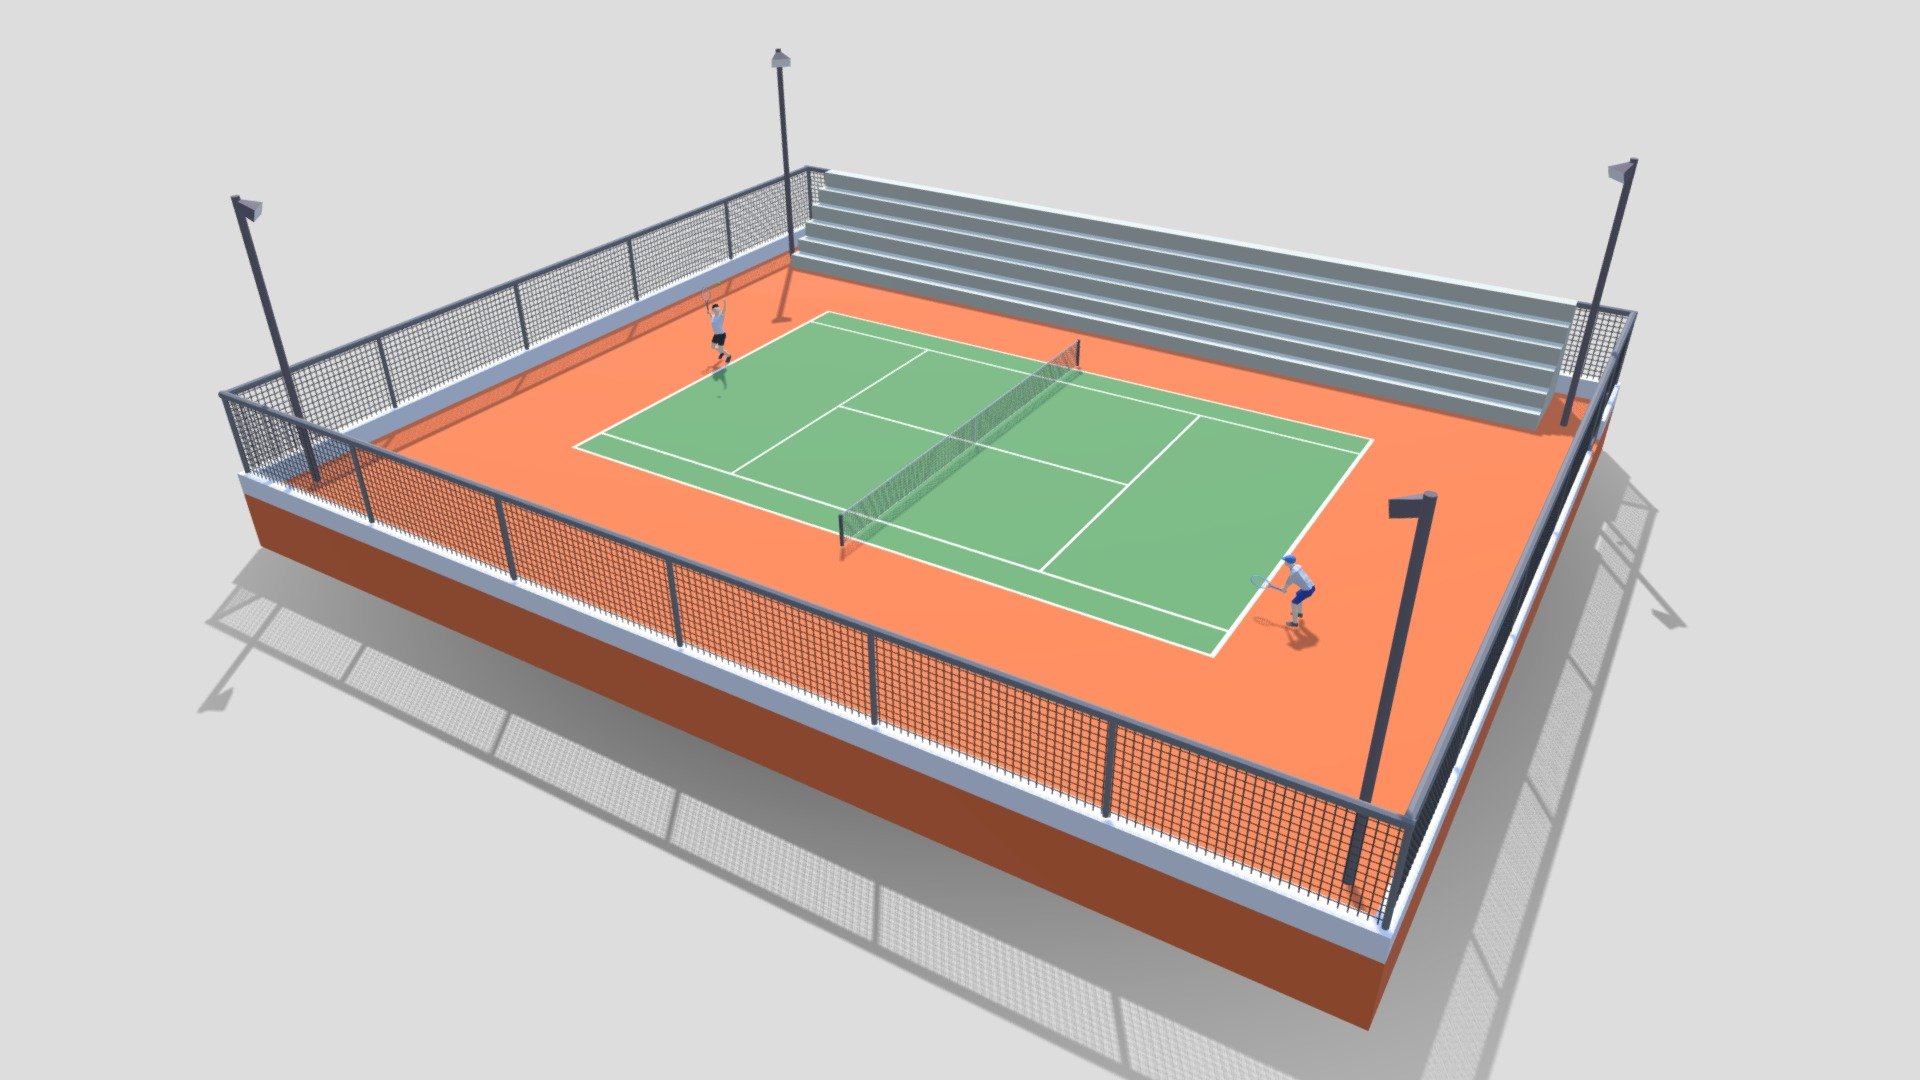 This is a cartoon 3D model of a tennis court with 2 kids playing tennis. The 3D scene was modeled and prepared for low-poly cartoon style renderings, background, general CG visualization.

The 3D model is presented as 8 meshes with quads/tris.

The court, The fence, The lights, The side walls, The door, The bleachers, Tennis kid 1, Tennis kid 2

Verts : 74.140 Faces: 94.638.

All meshes have simple materials with diffuse colors.

No ring, maps and no UVW mapping is available.

The original file was created in blender. You will receive a OBJ, FBX, blend, DAE, Stl.

All preview images were rendered with Blender Cycles. Product is ready to render out-of-the-box. Please note that the lights, cameras, and background is only included in the .blend file. The model is clean and alone in the other provided files, centered at origin and has real-world scale 3d model